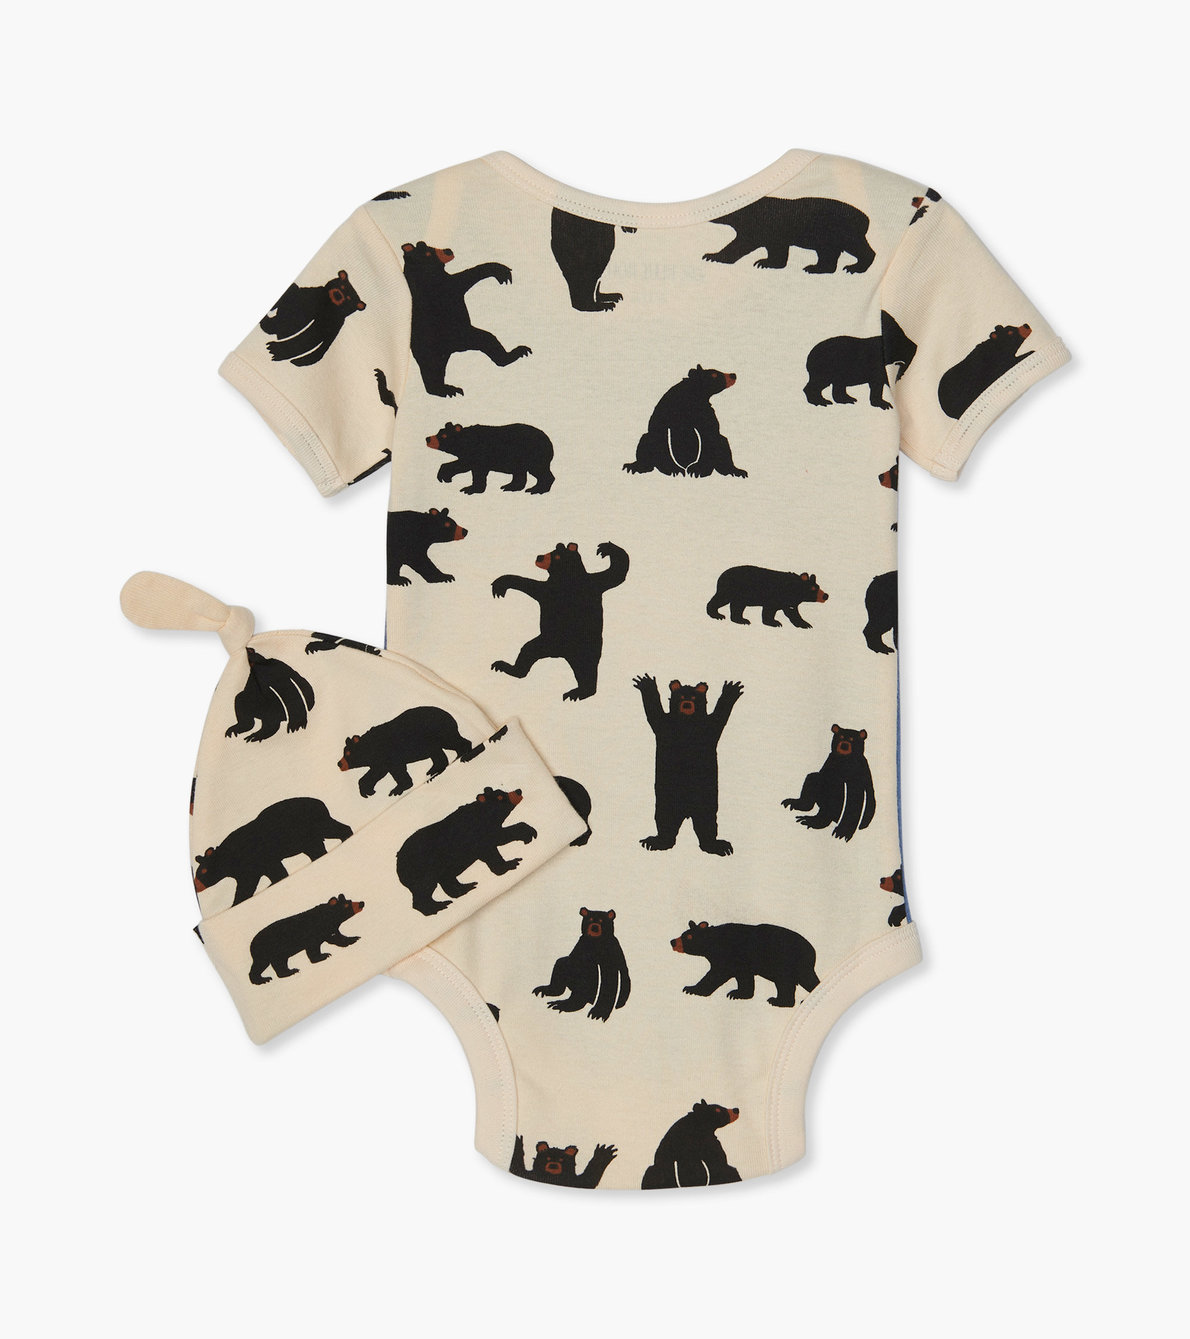 View larger image of Black Bears Baby Bodysuit with Hat